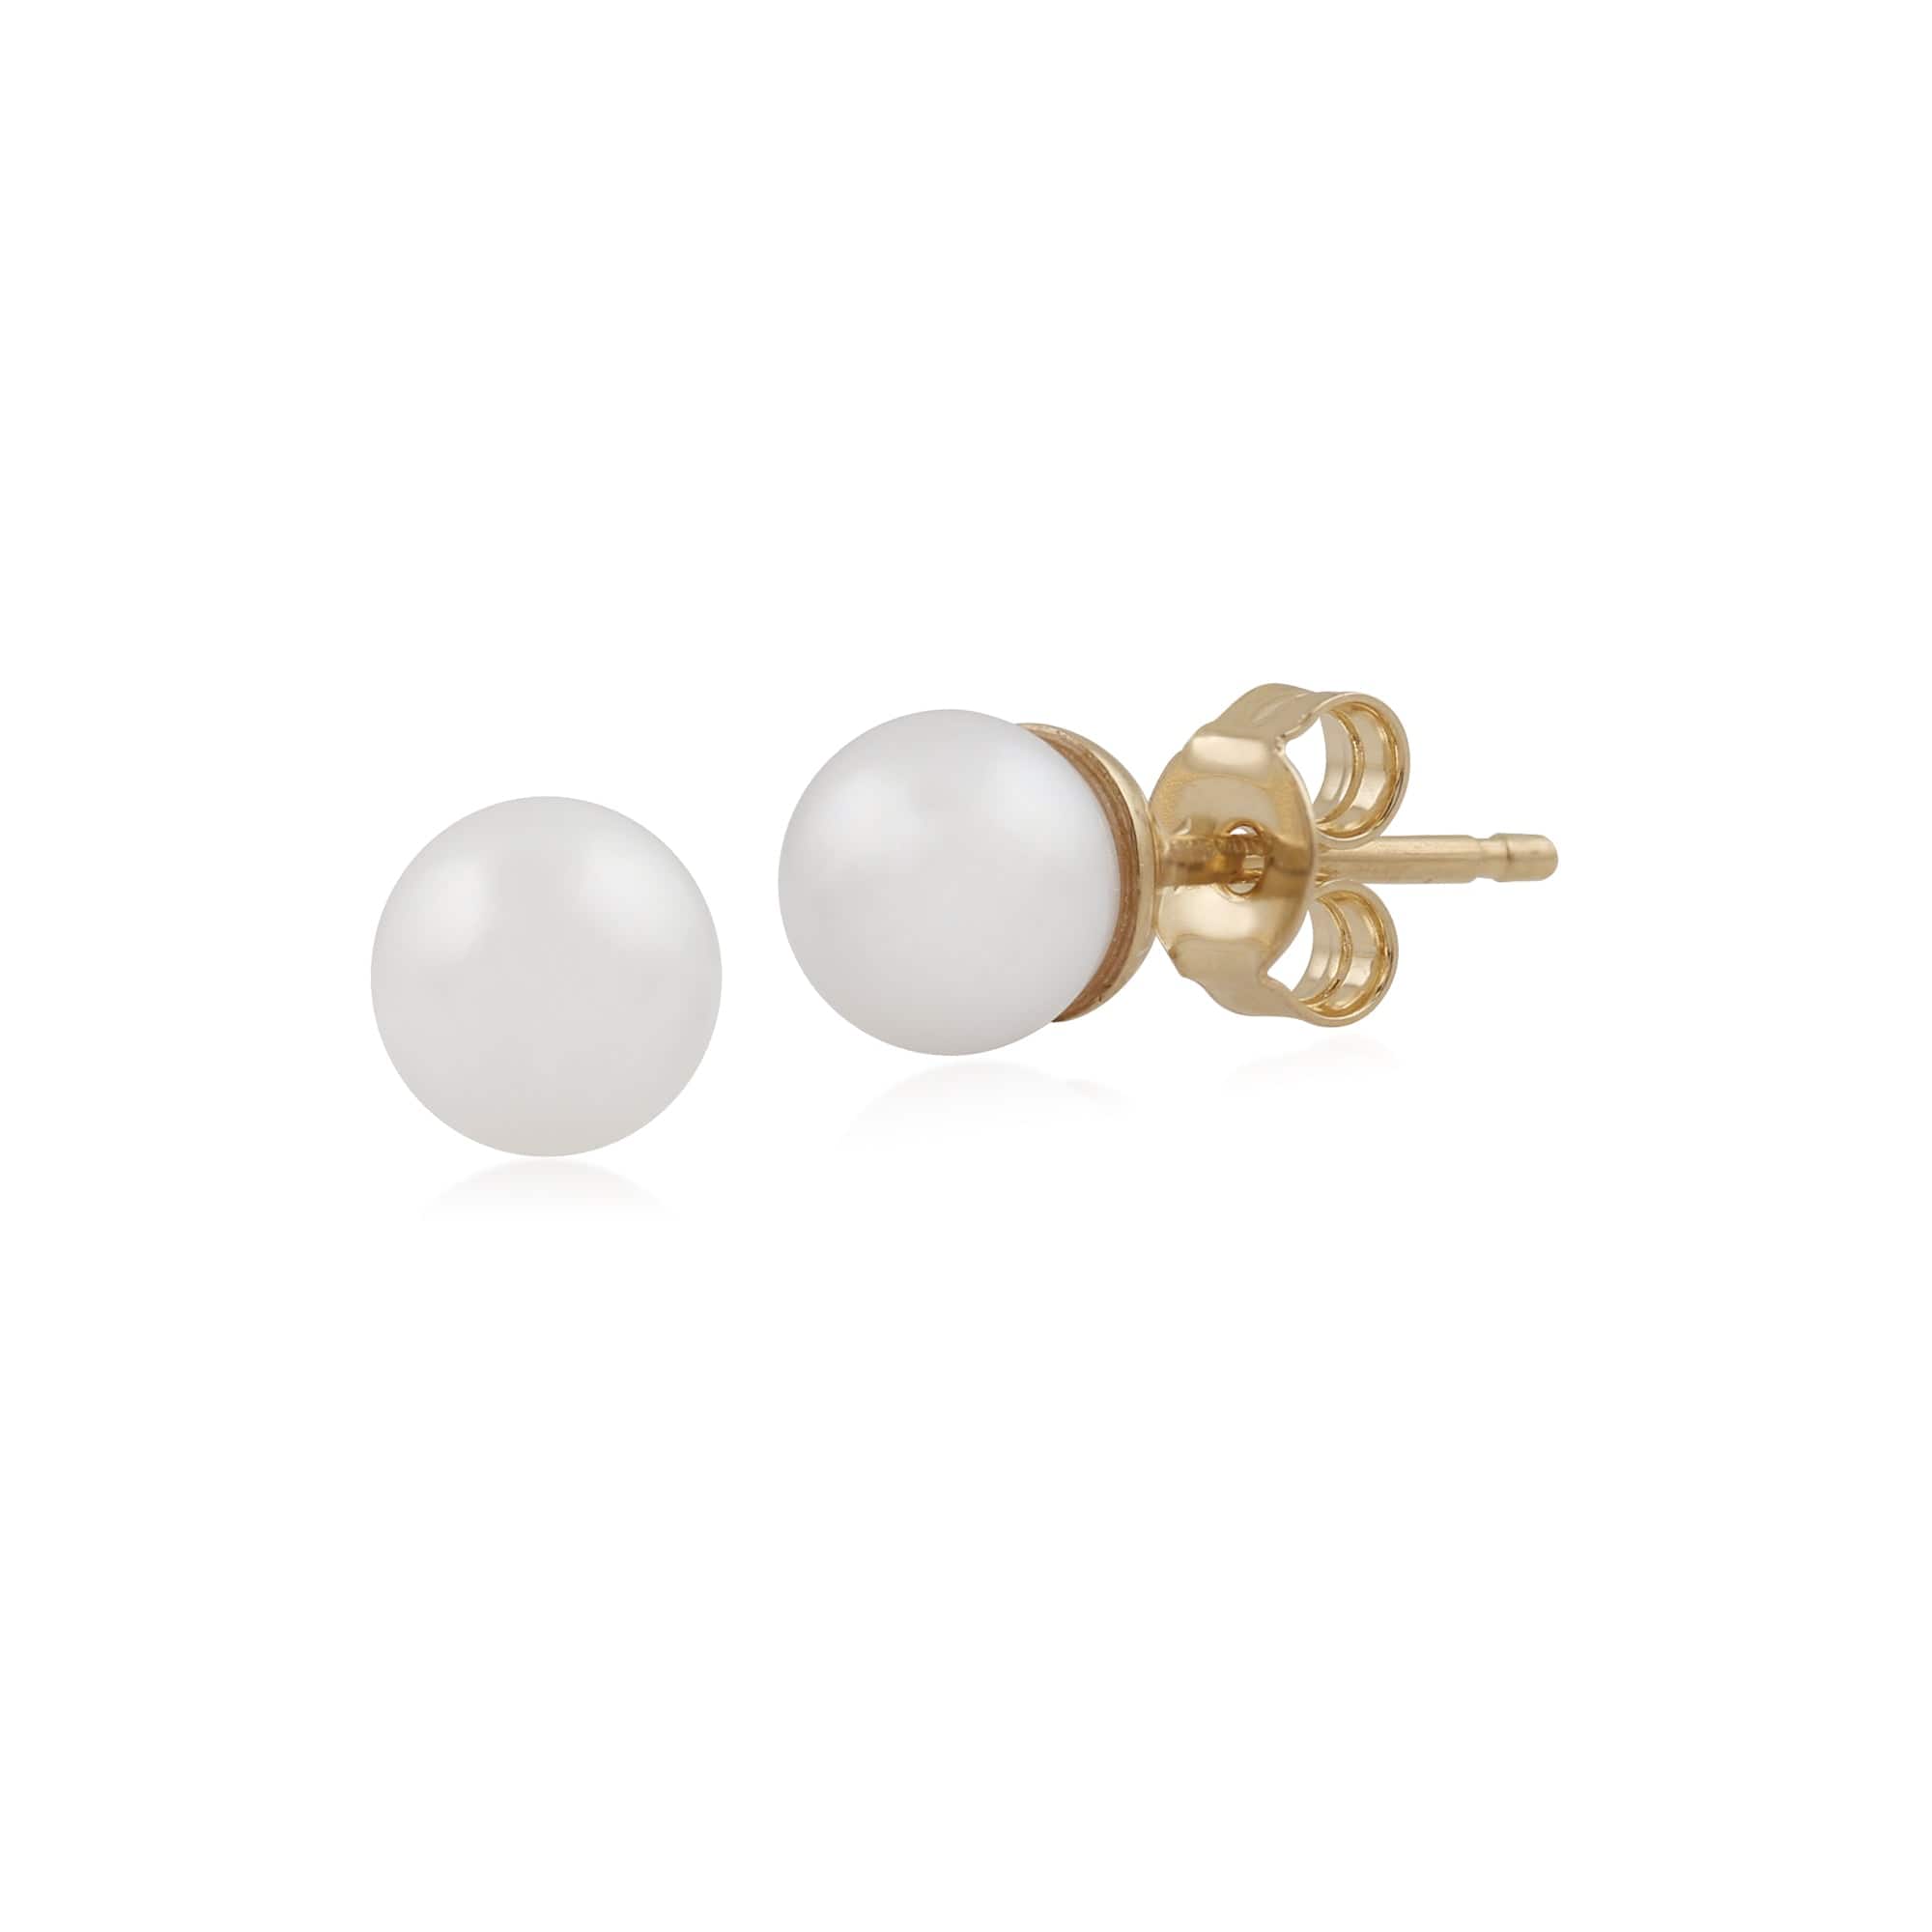 Classic Full Round Freshwater Pearl Stud Earrings in 9ct Yellow Gold 5mm - Gemondo